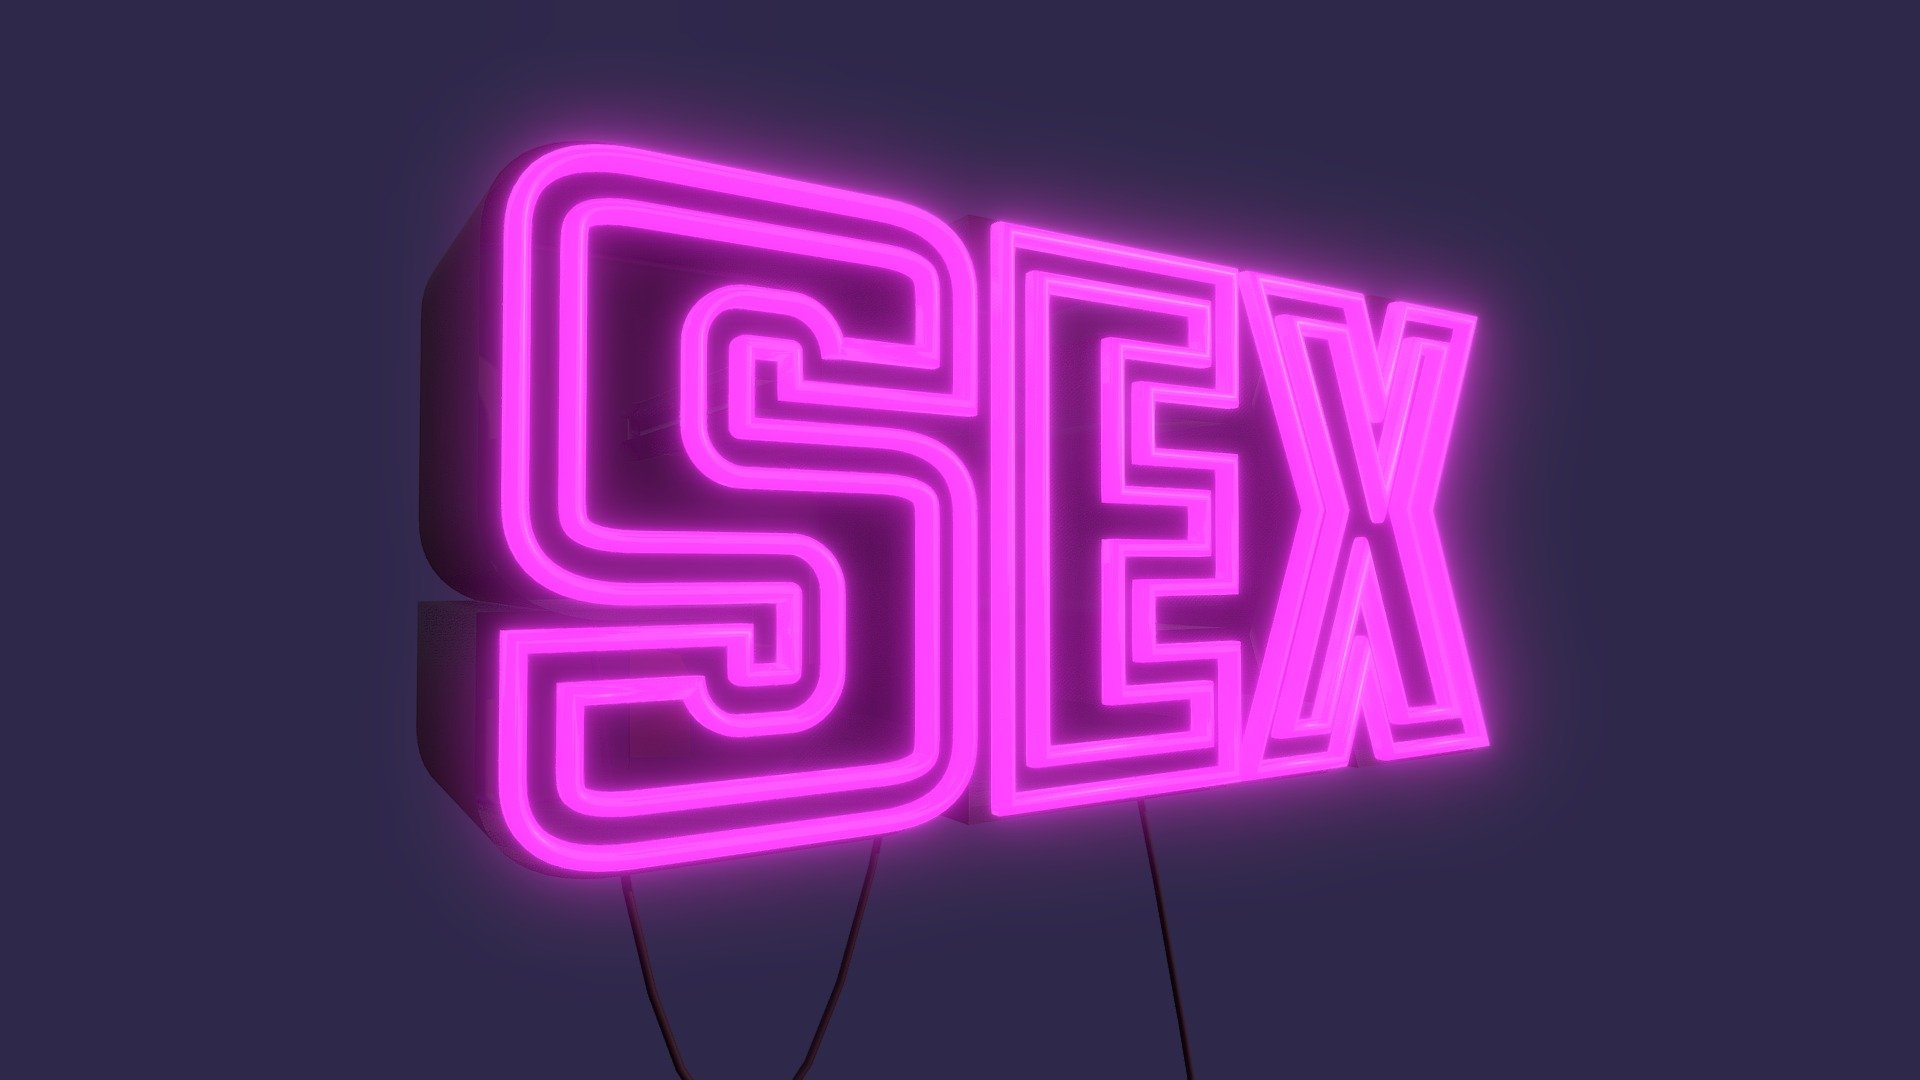 XXX Sign

Im sure I'm not the first, and I likely wont be the last. Spend today playing in Blender with texts and emissive stuff. Something broke with the animation and the layer colors, but I was still able to replicate it in sketchfab. And by &ldquo;broke